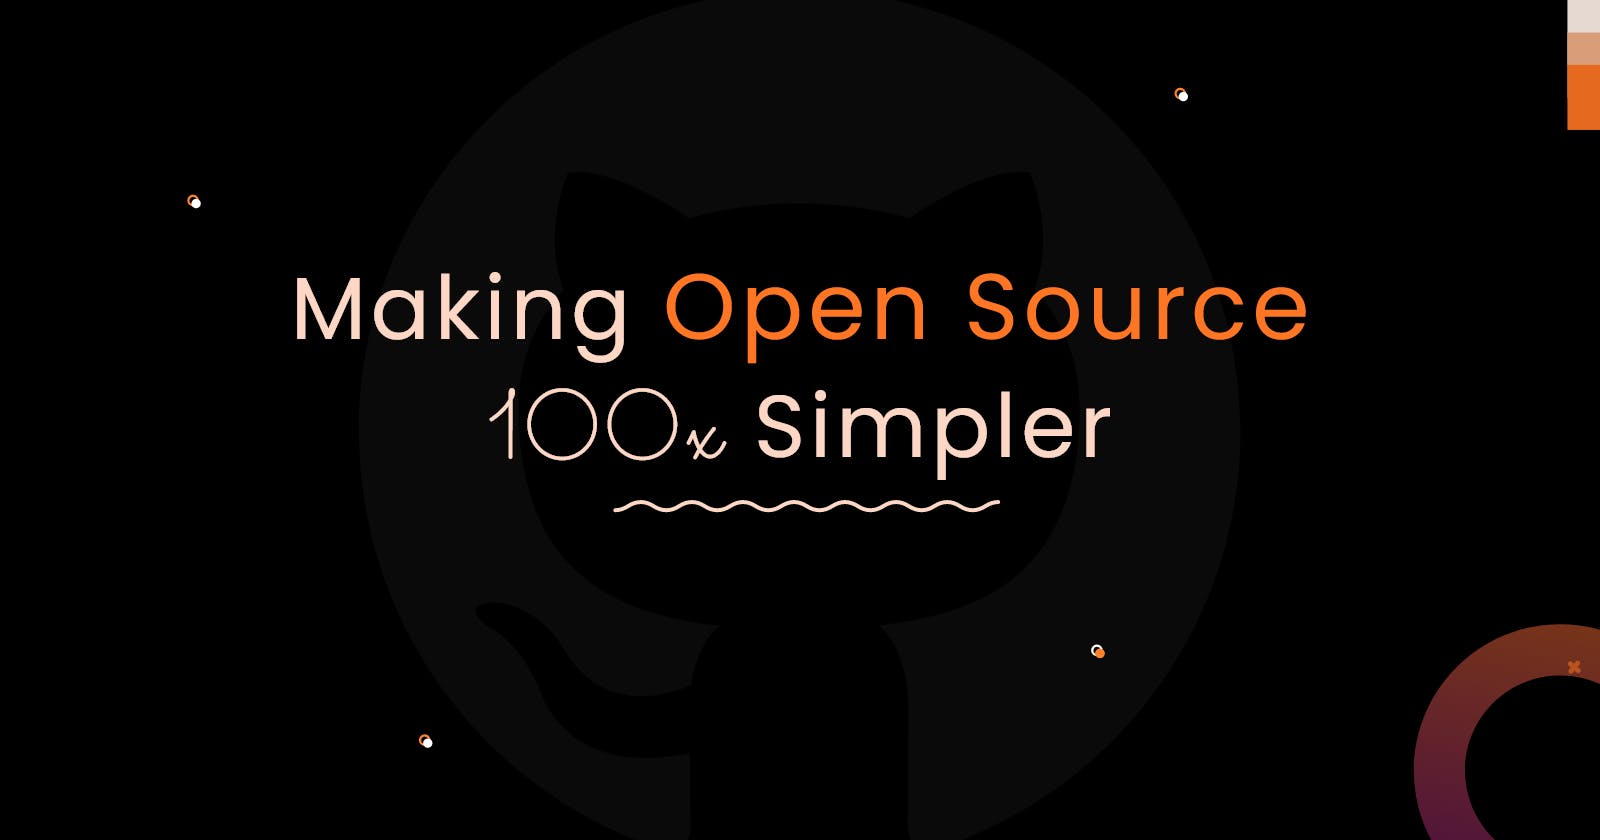 A complete guide to open source - 100x simpler